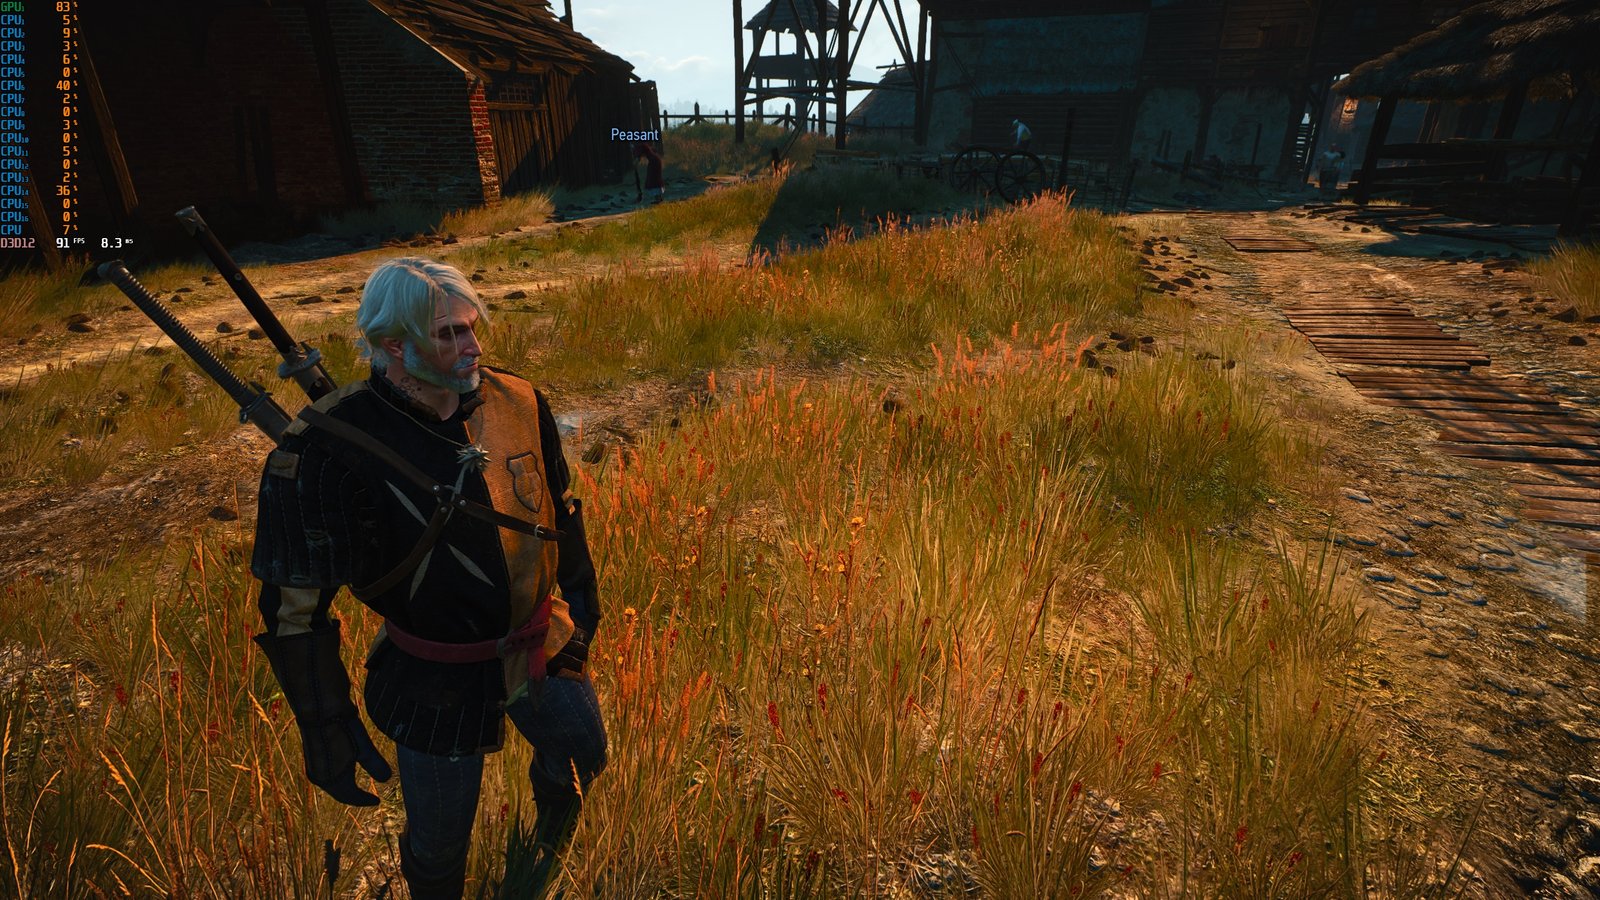 Crows nest witcher 3 screenshot showing foliage with no AO enabled